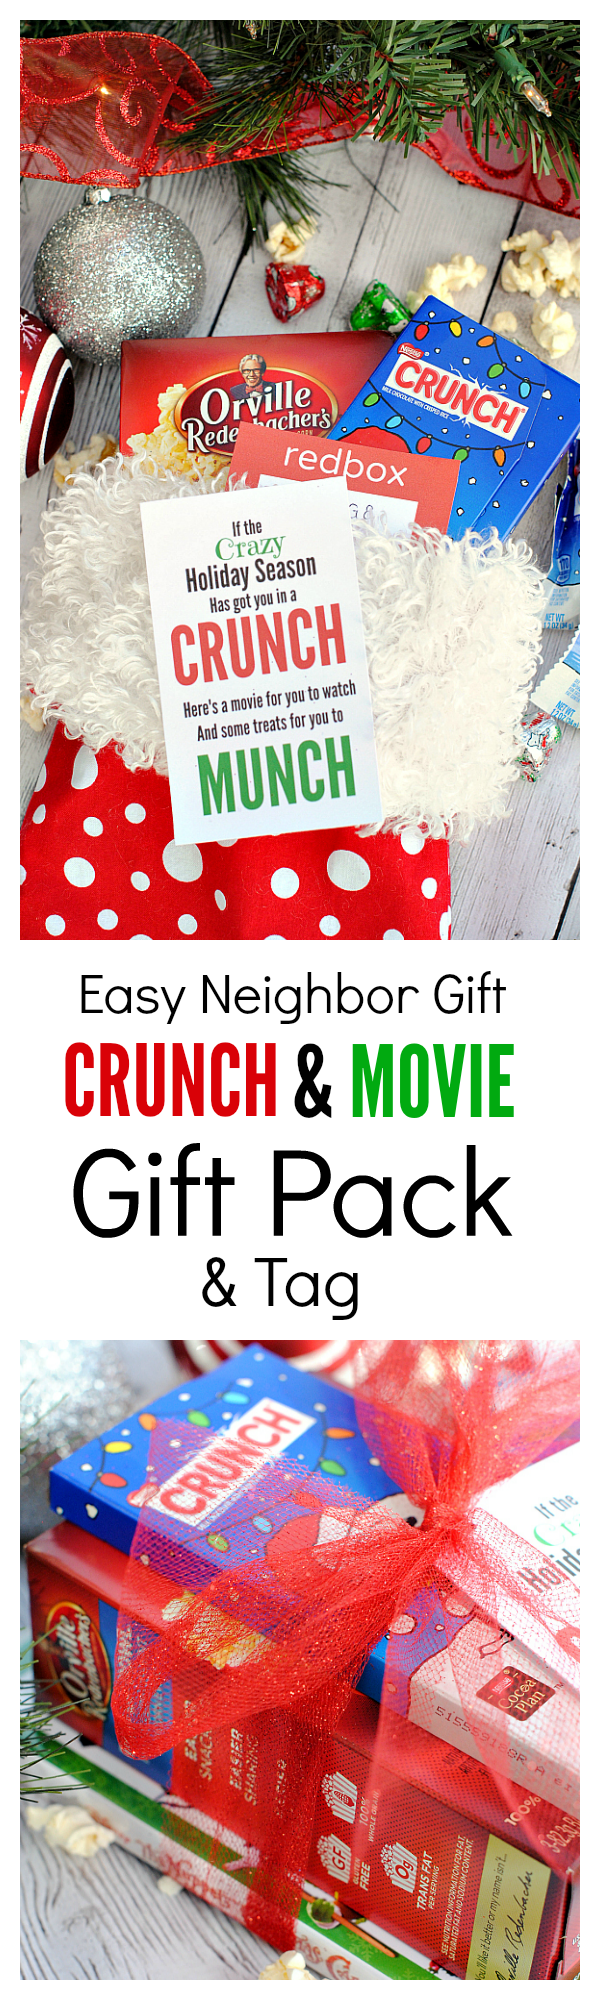 Cute Neighbor Gift Idea: If the crazy holiday season has got you in a CRUNCH, here's a movie for your to watch and some treats for your to MUNCH